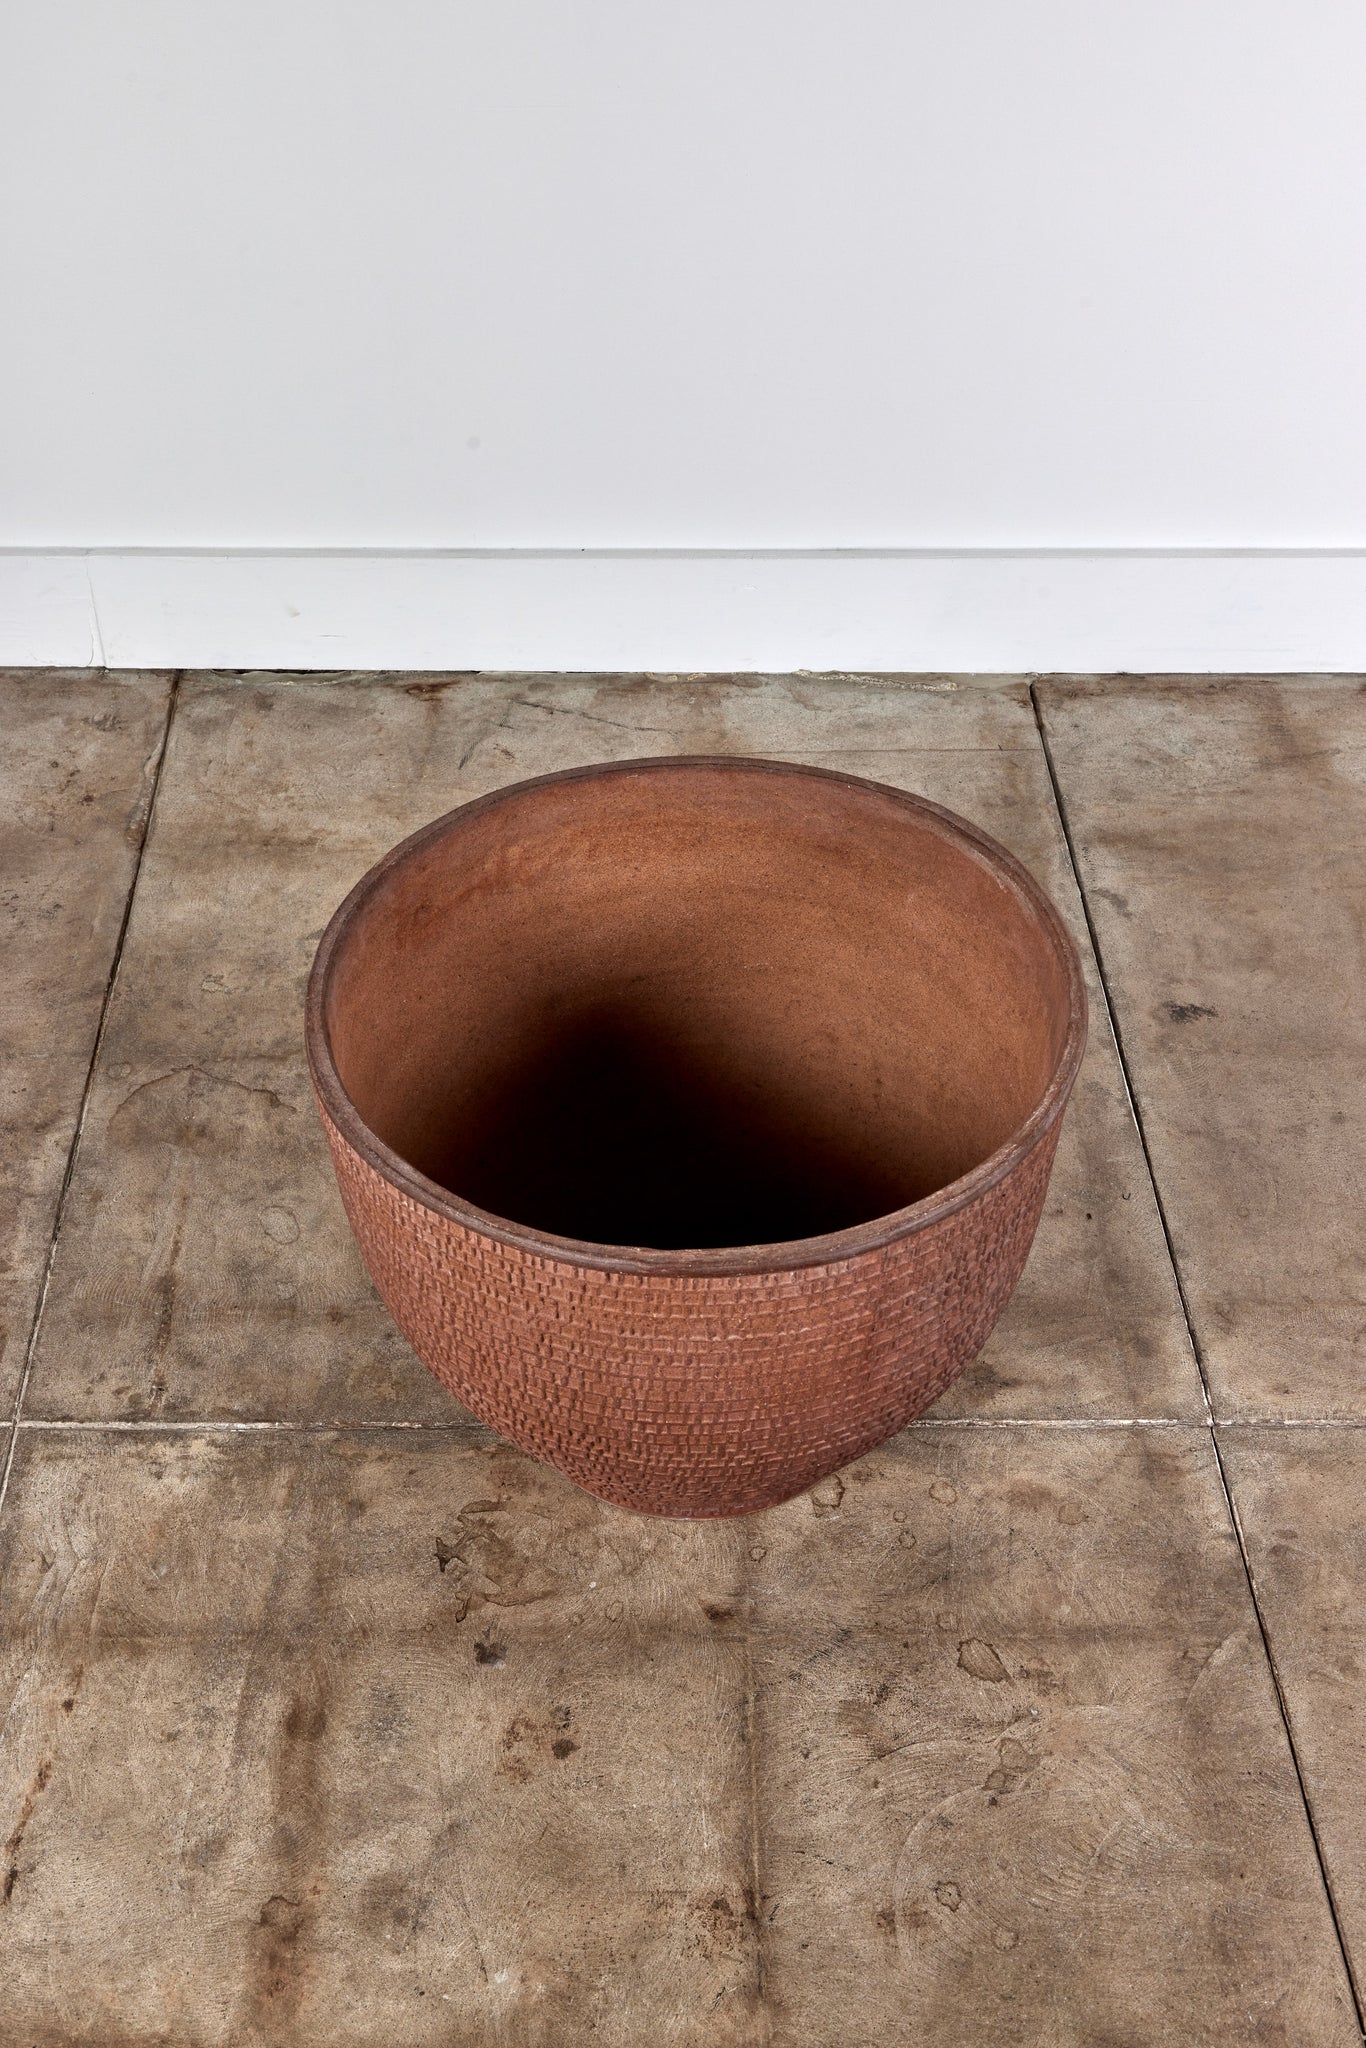 Large David Cressey "Rectangle" Stoneware Pro/Artisan Planter for Architectural Pottery